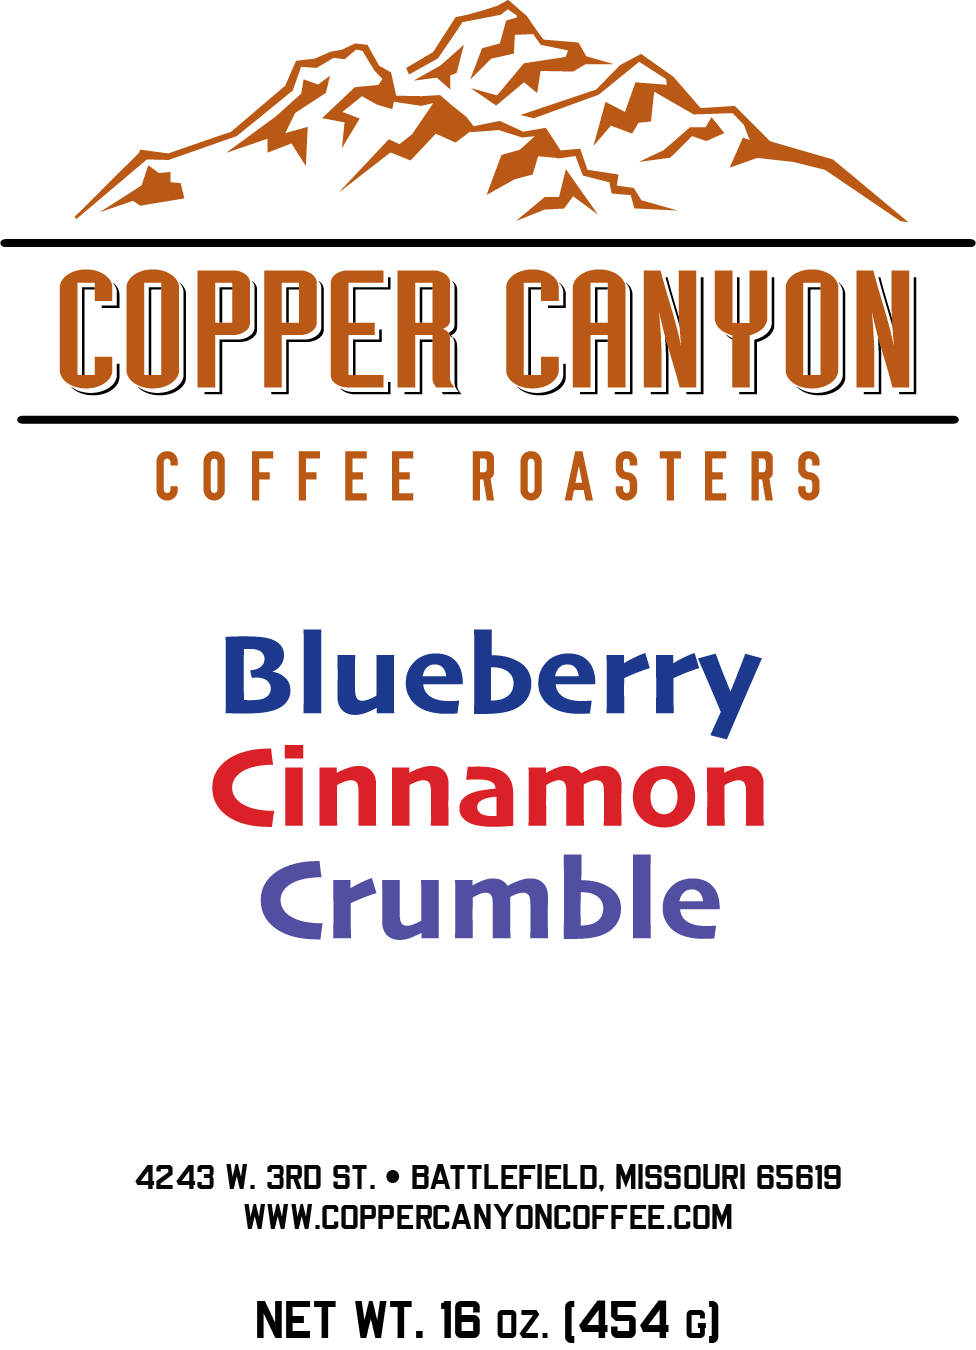 Blueberry Cinnamon Crumble Flavored Coffee